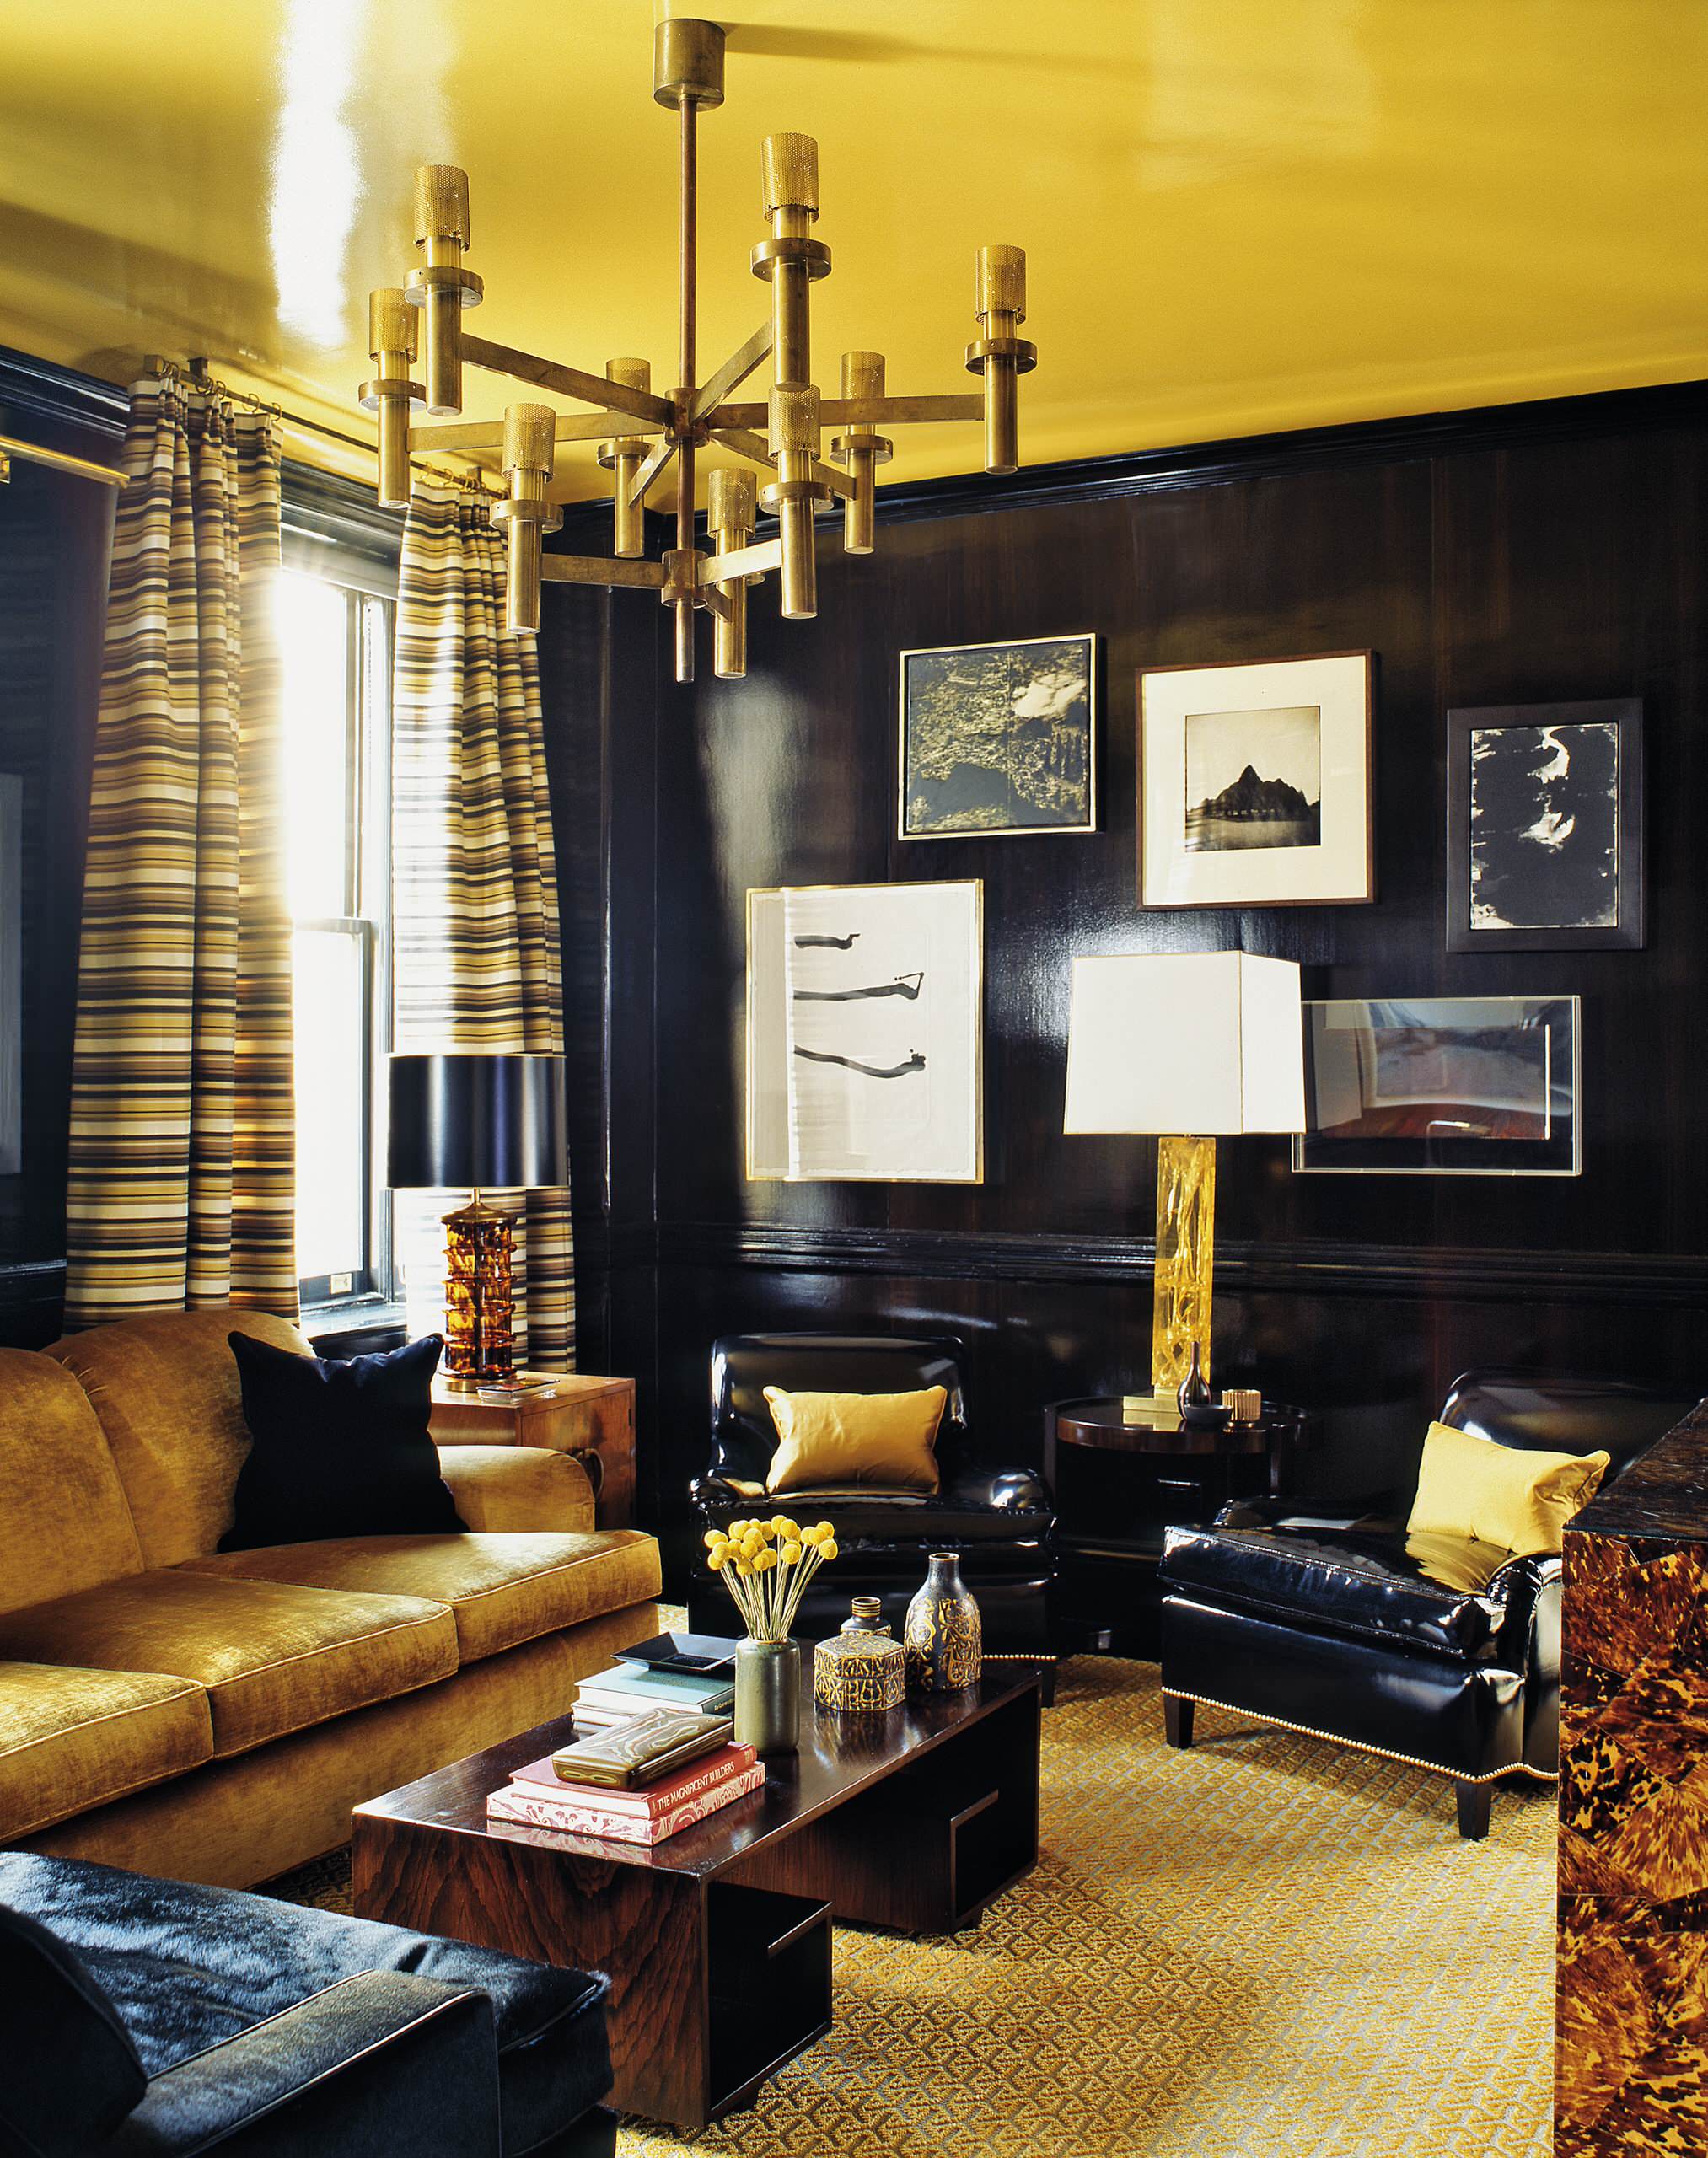 Black And Gold Living Room Ideas, Black And Gold Living Room Ideas